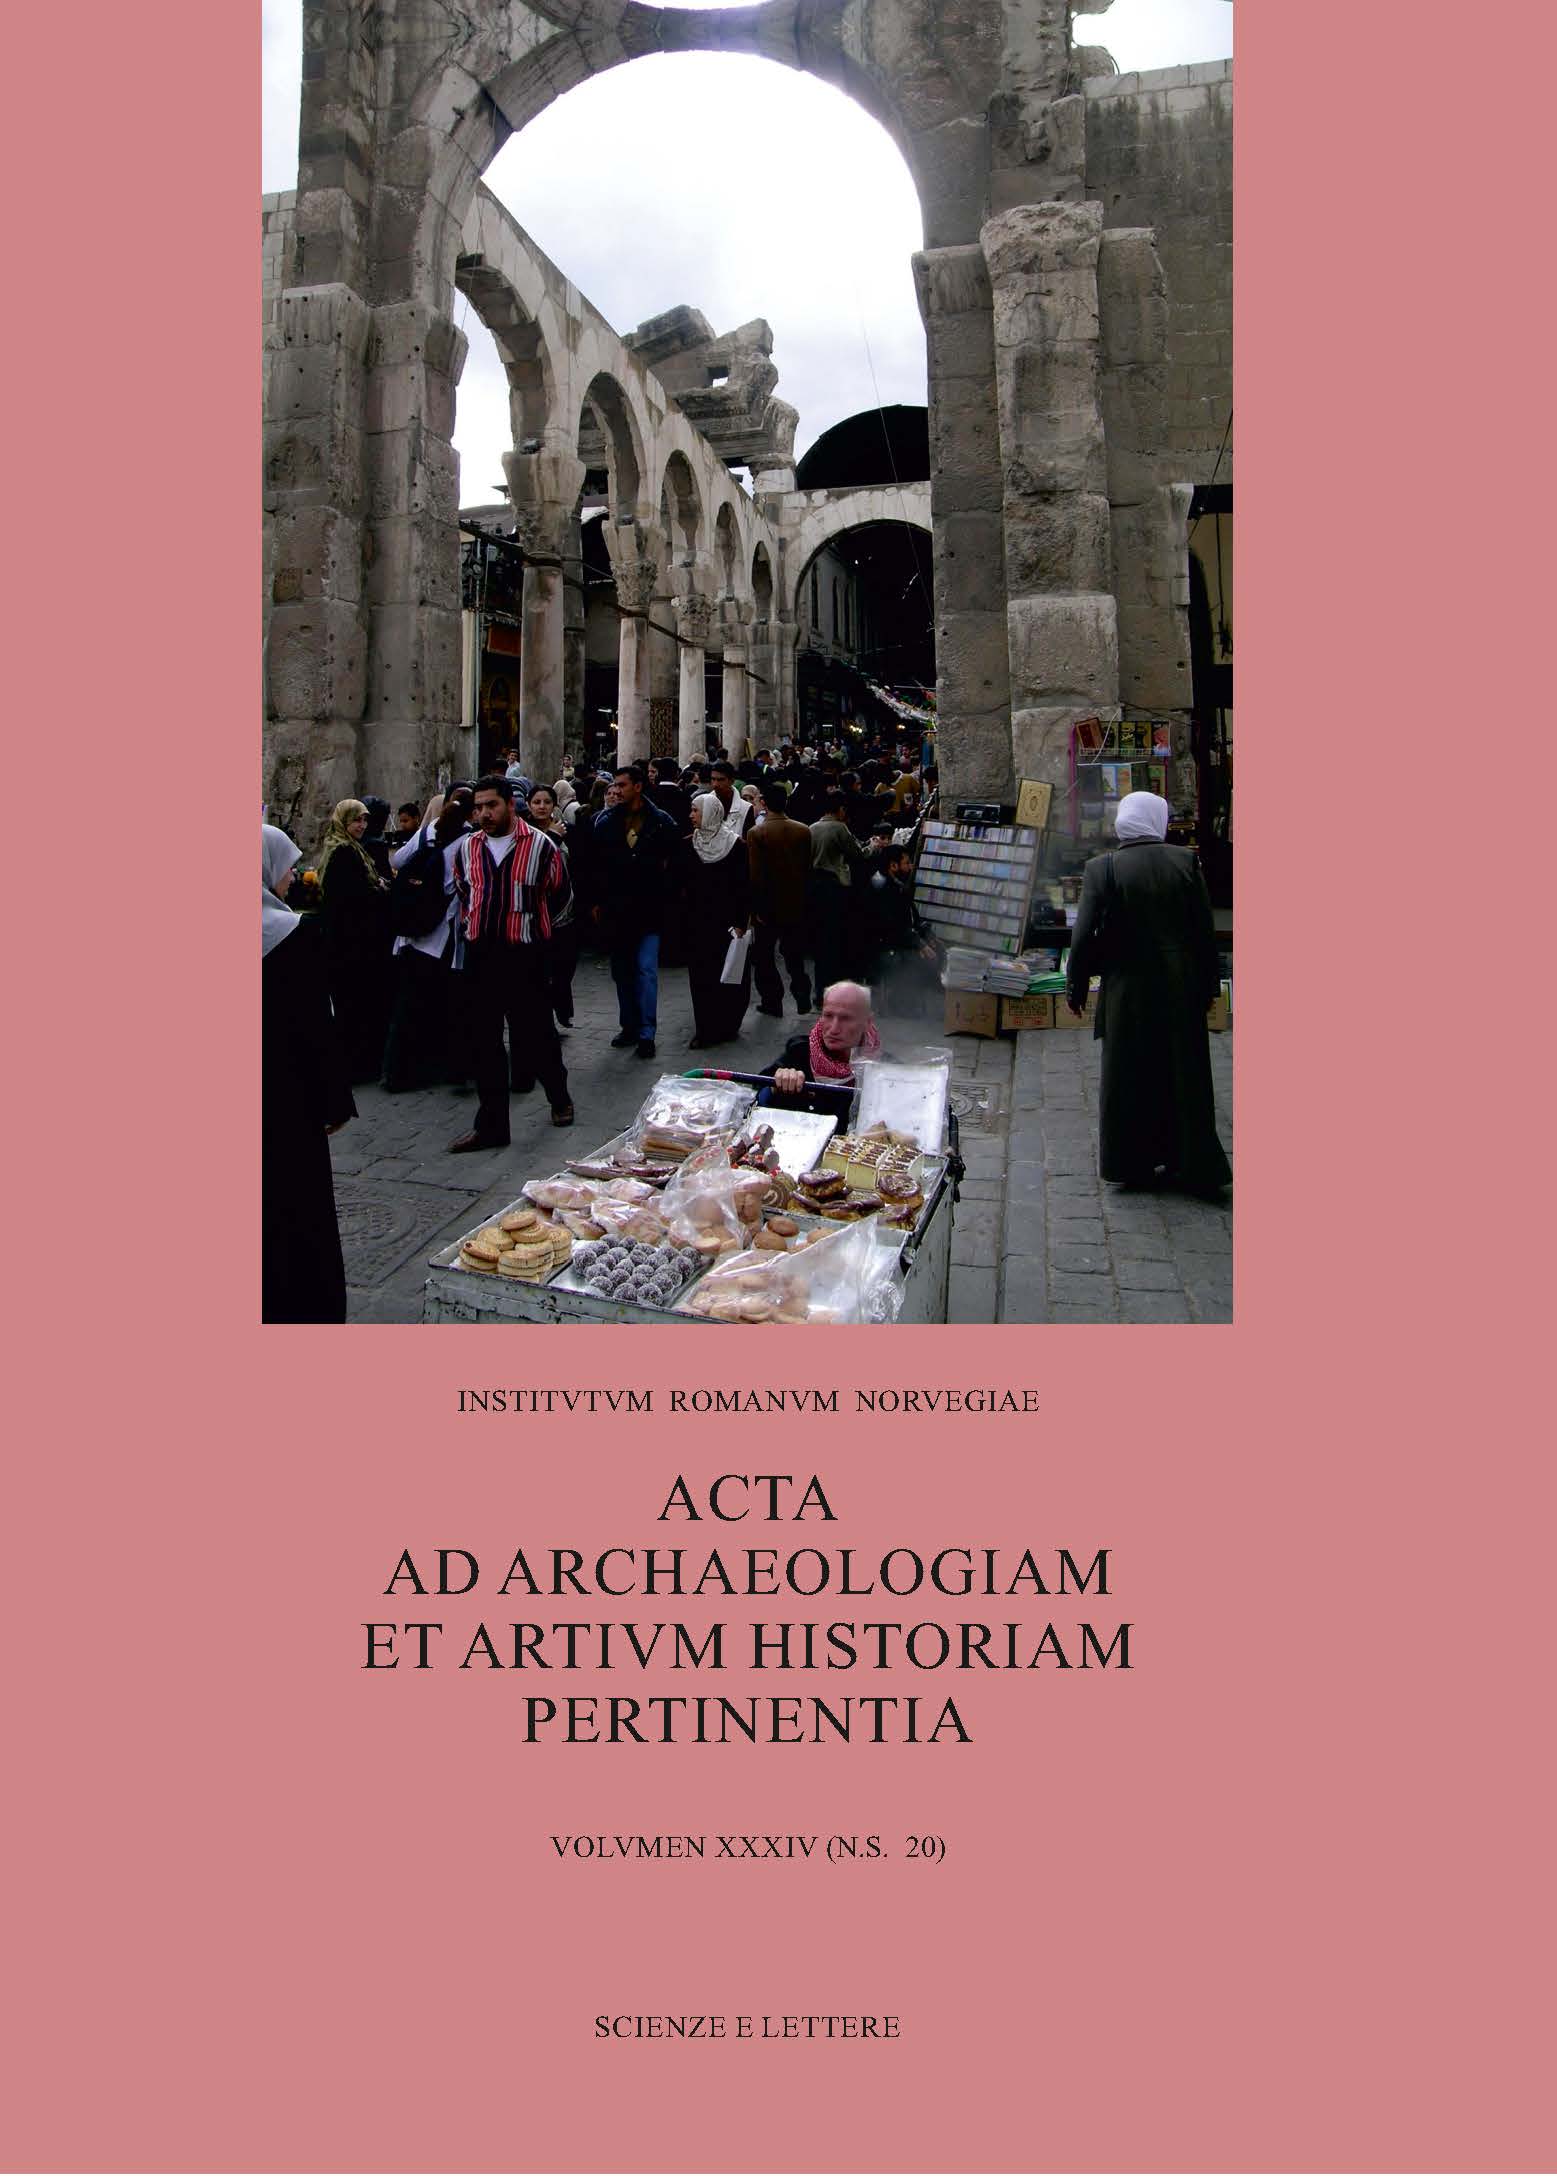 On the cover: “Propylaeum of the Roman temple of Jupiter in Damascus, now a lively market-street. Photo (2004) courtesy of Jørgen Christian Meyer”.